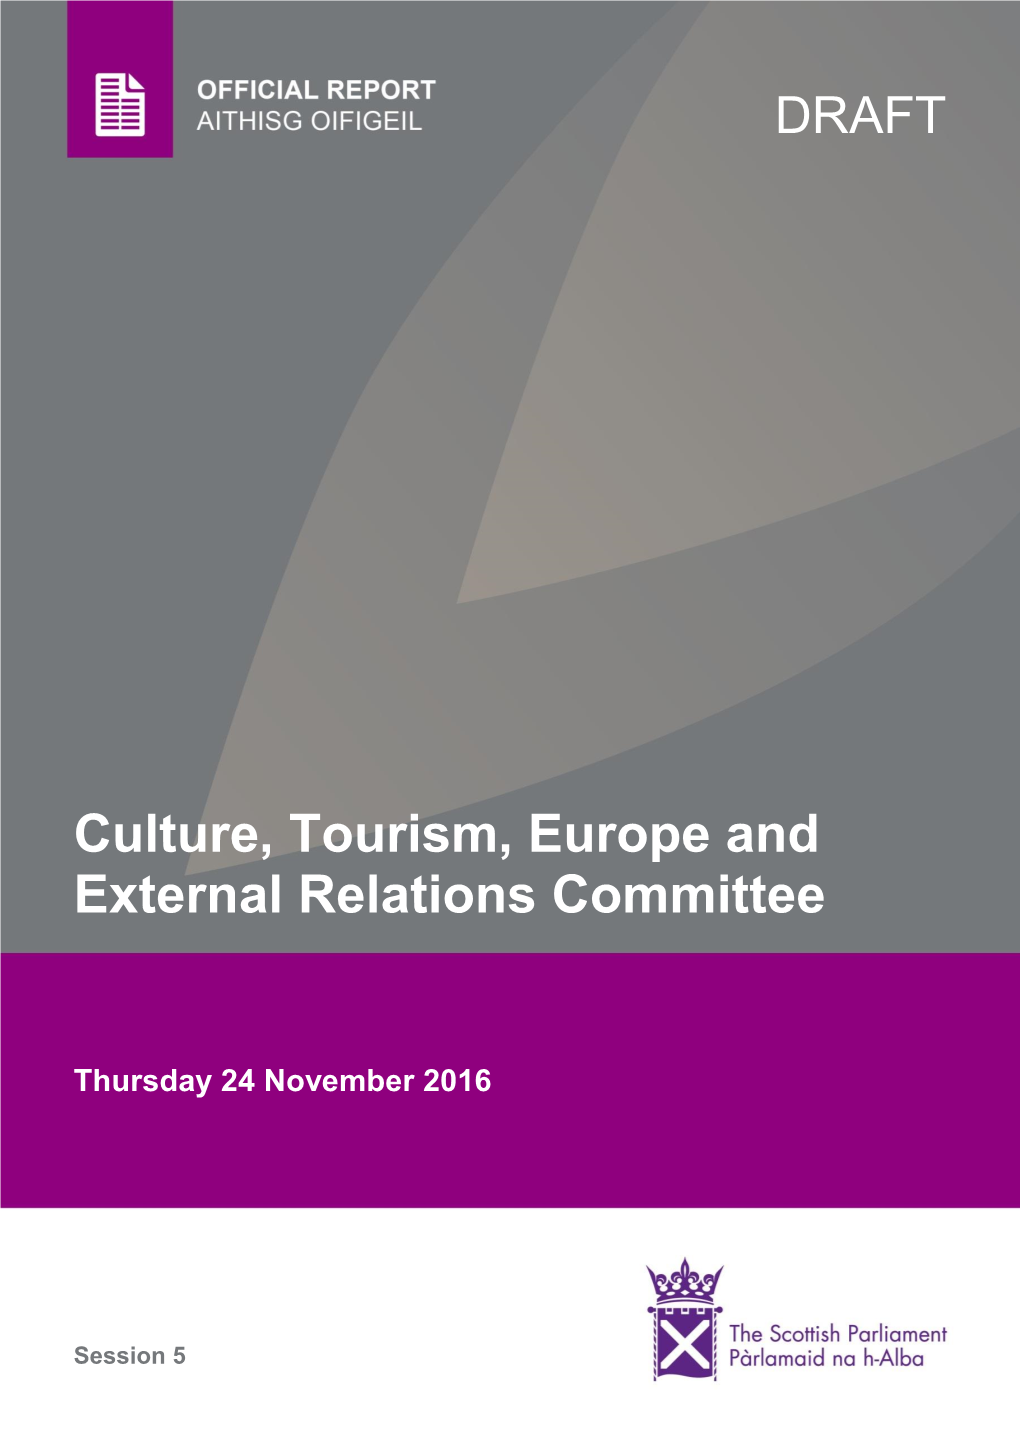 Culture, Tourism, Europe and External Relations Committee